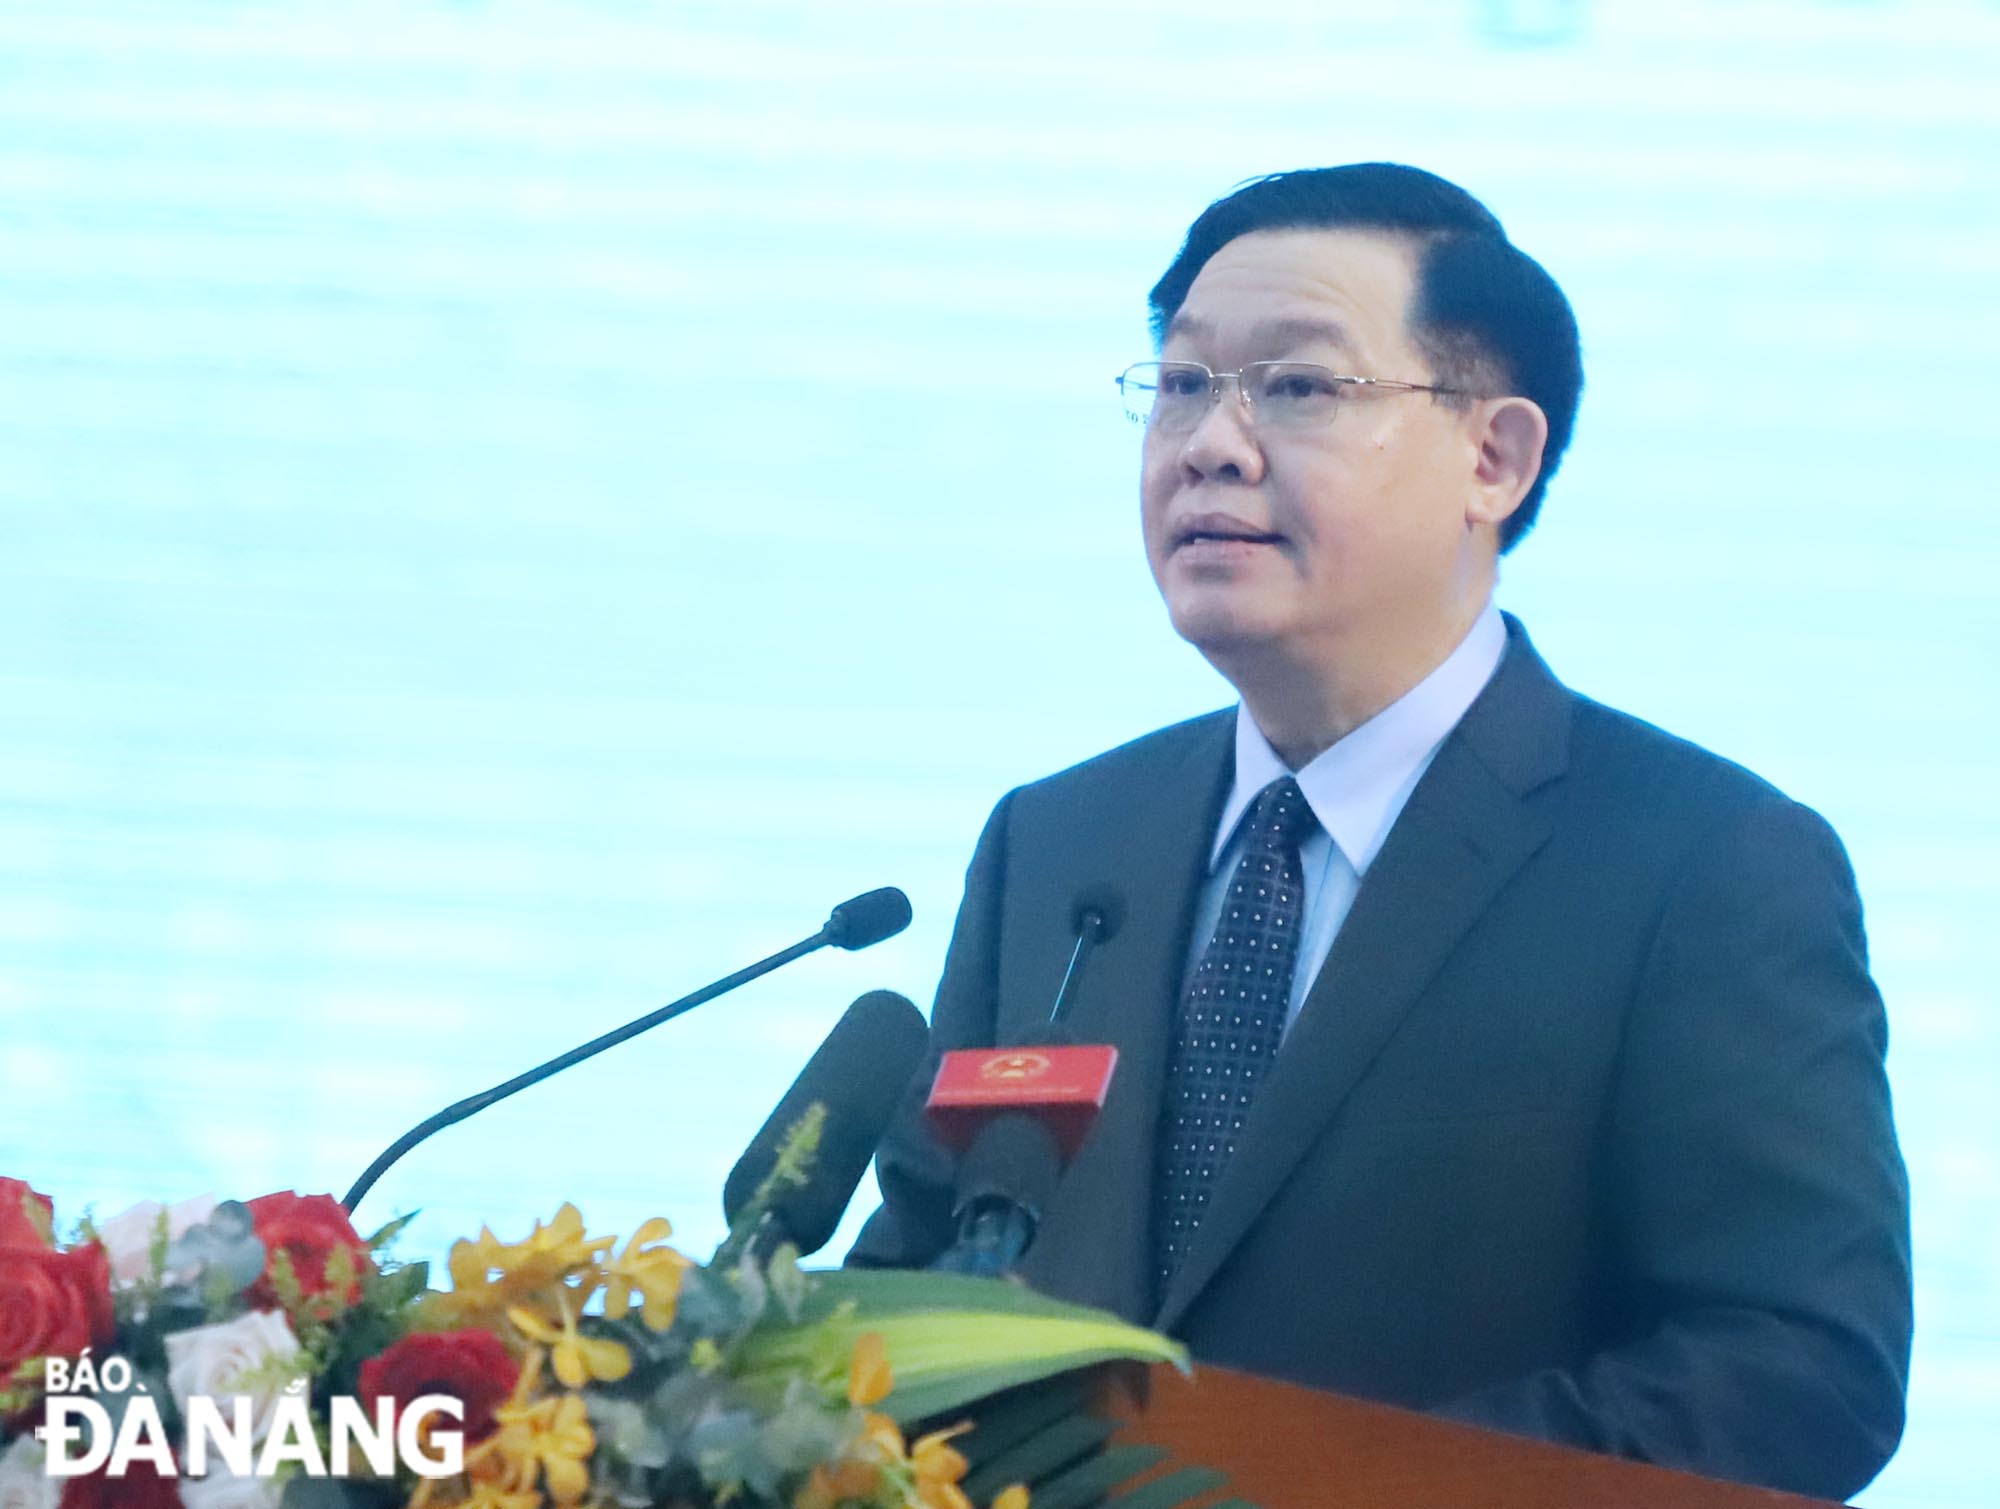 Chairman of the National Assembly Vuong Dinh Hue delivering his opening speech